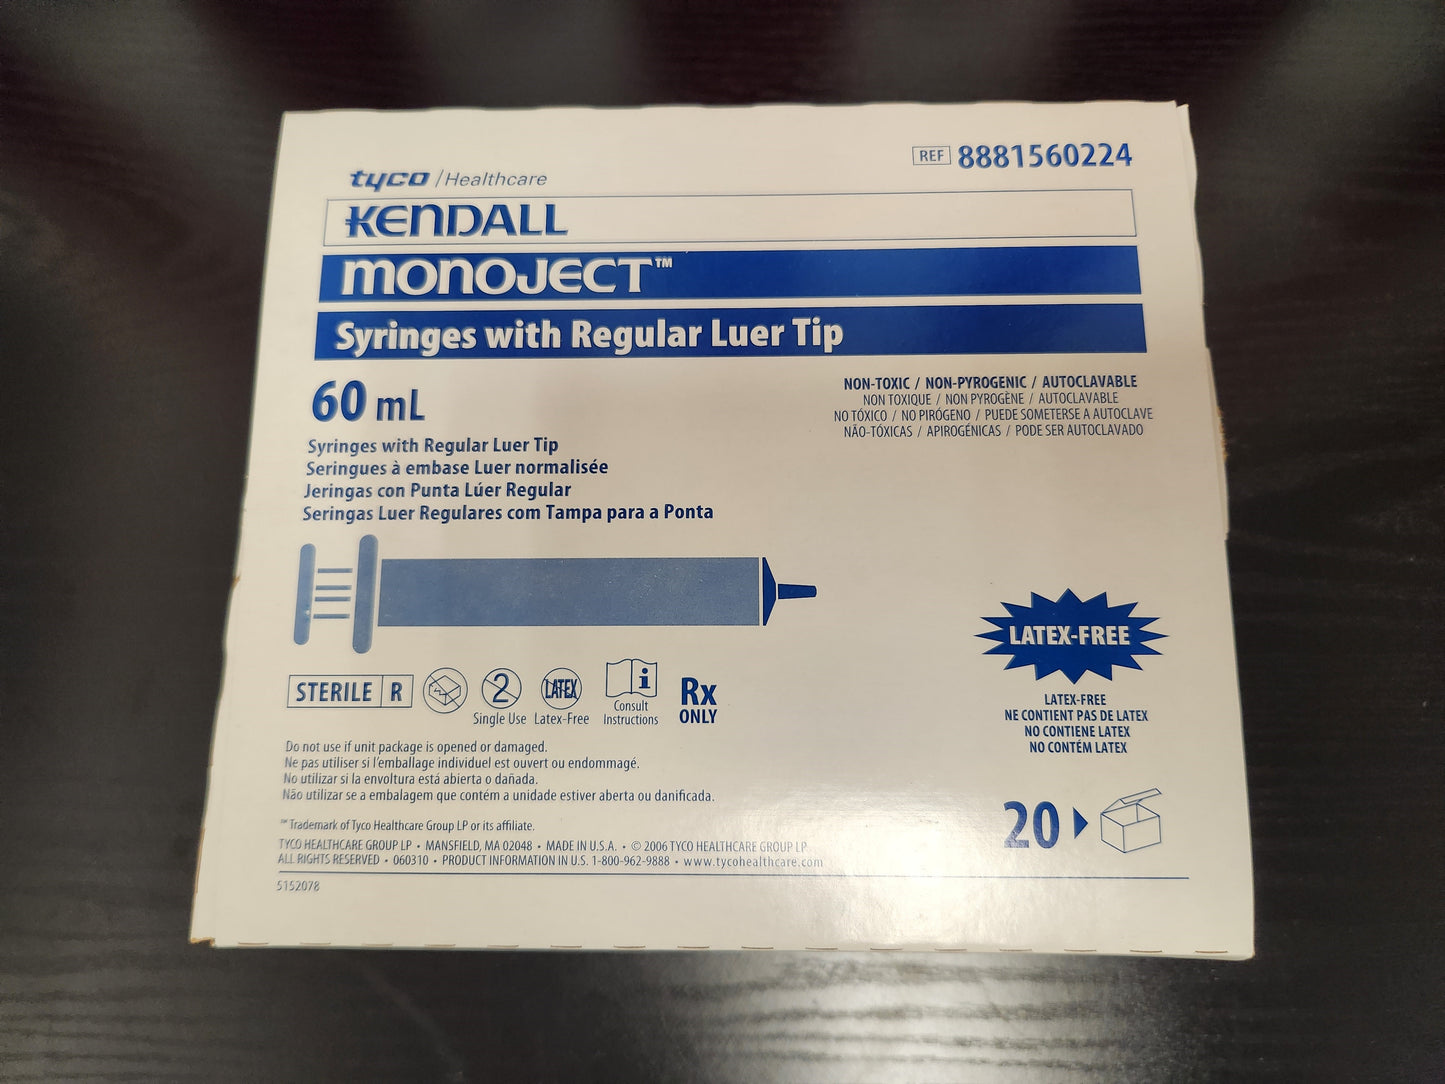 Kendall Monoject Syringes with Regular Luer Tip (60mL, Box of 20) - New/Open Box